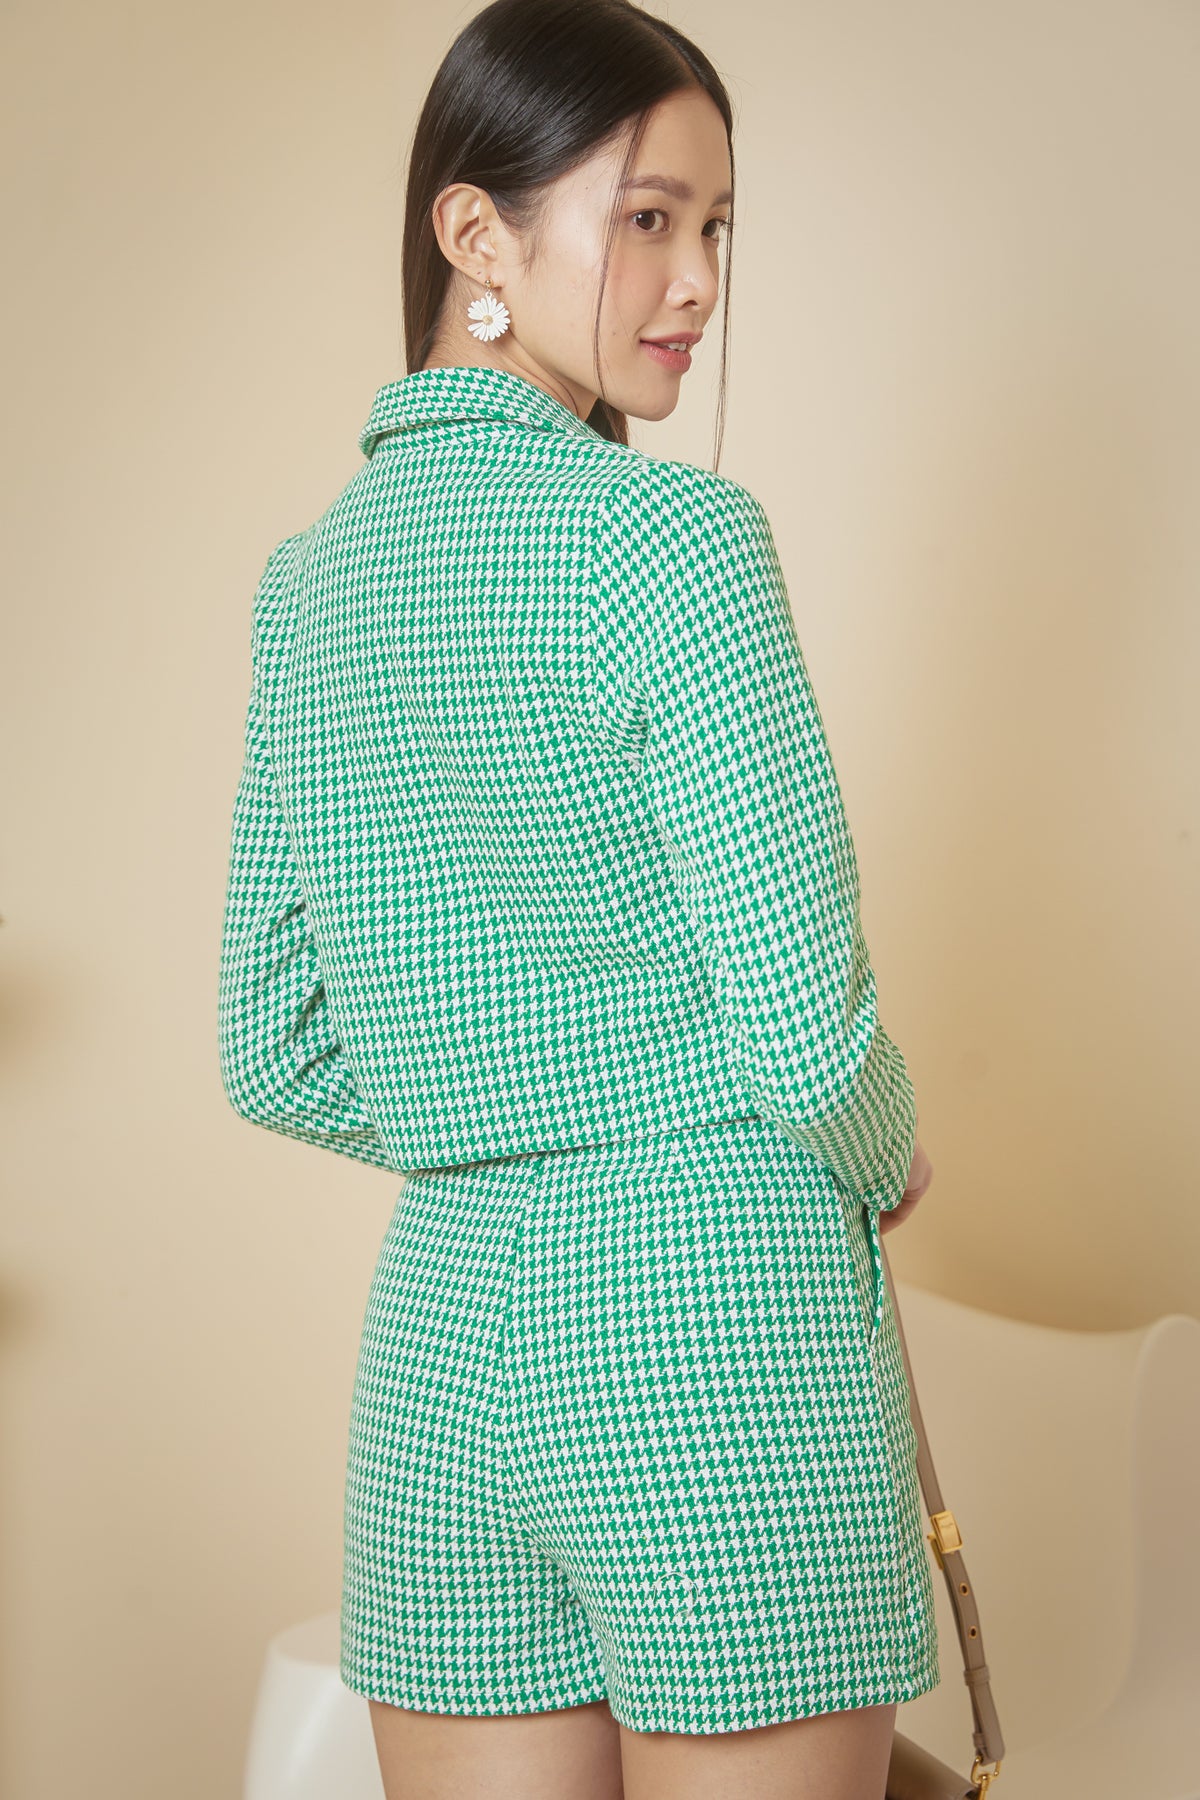 Tweed Cropped Blazer in Green Houndstooth